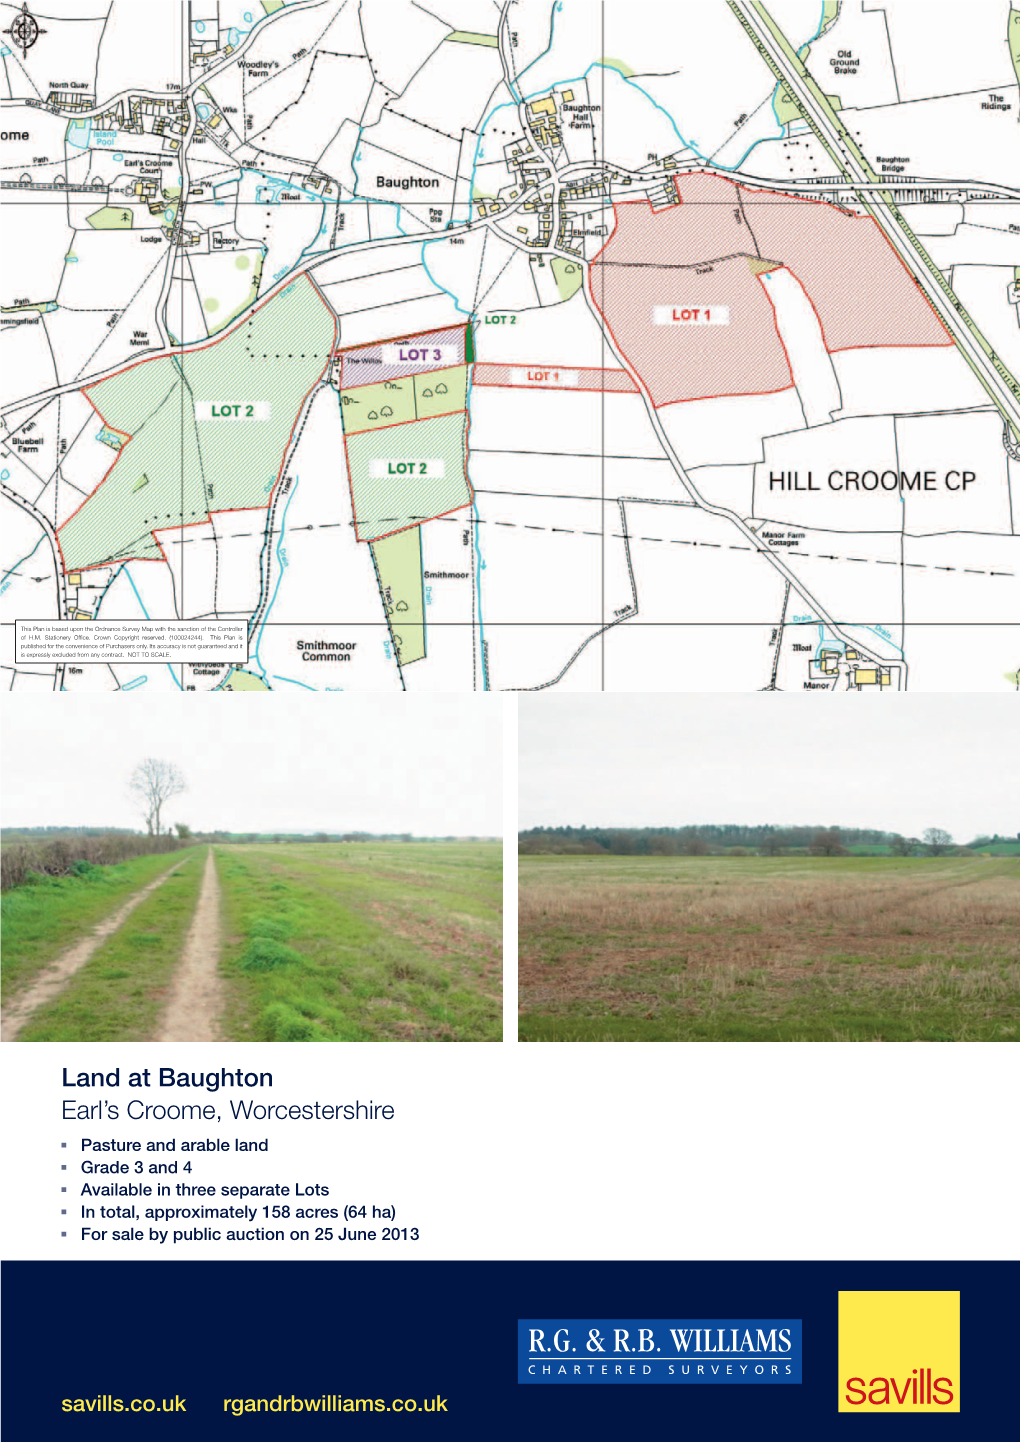 Land at Baughton Earl's Croome, Worcestershire